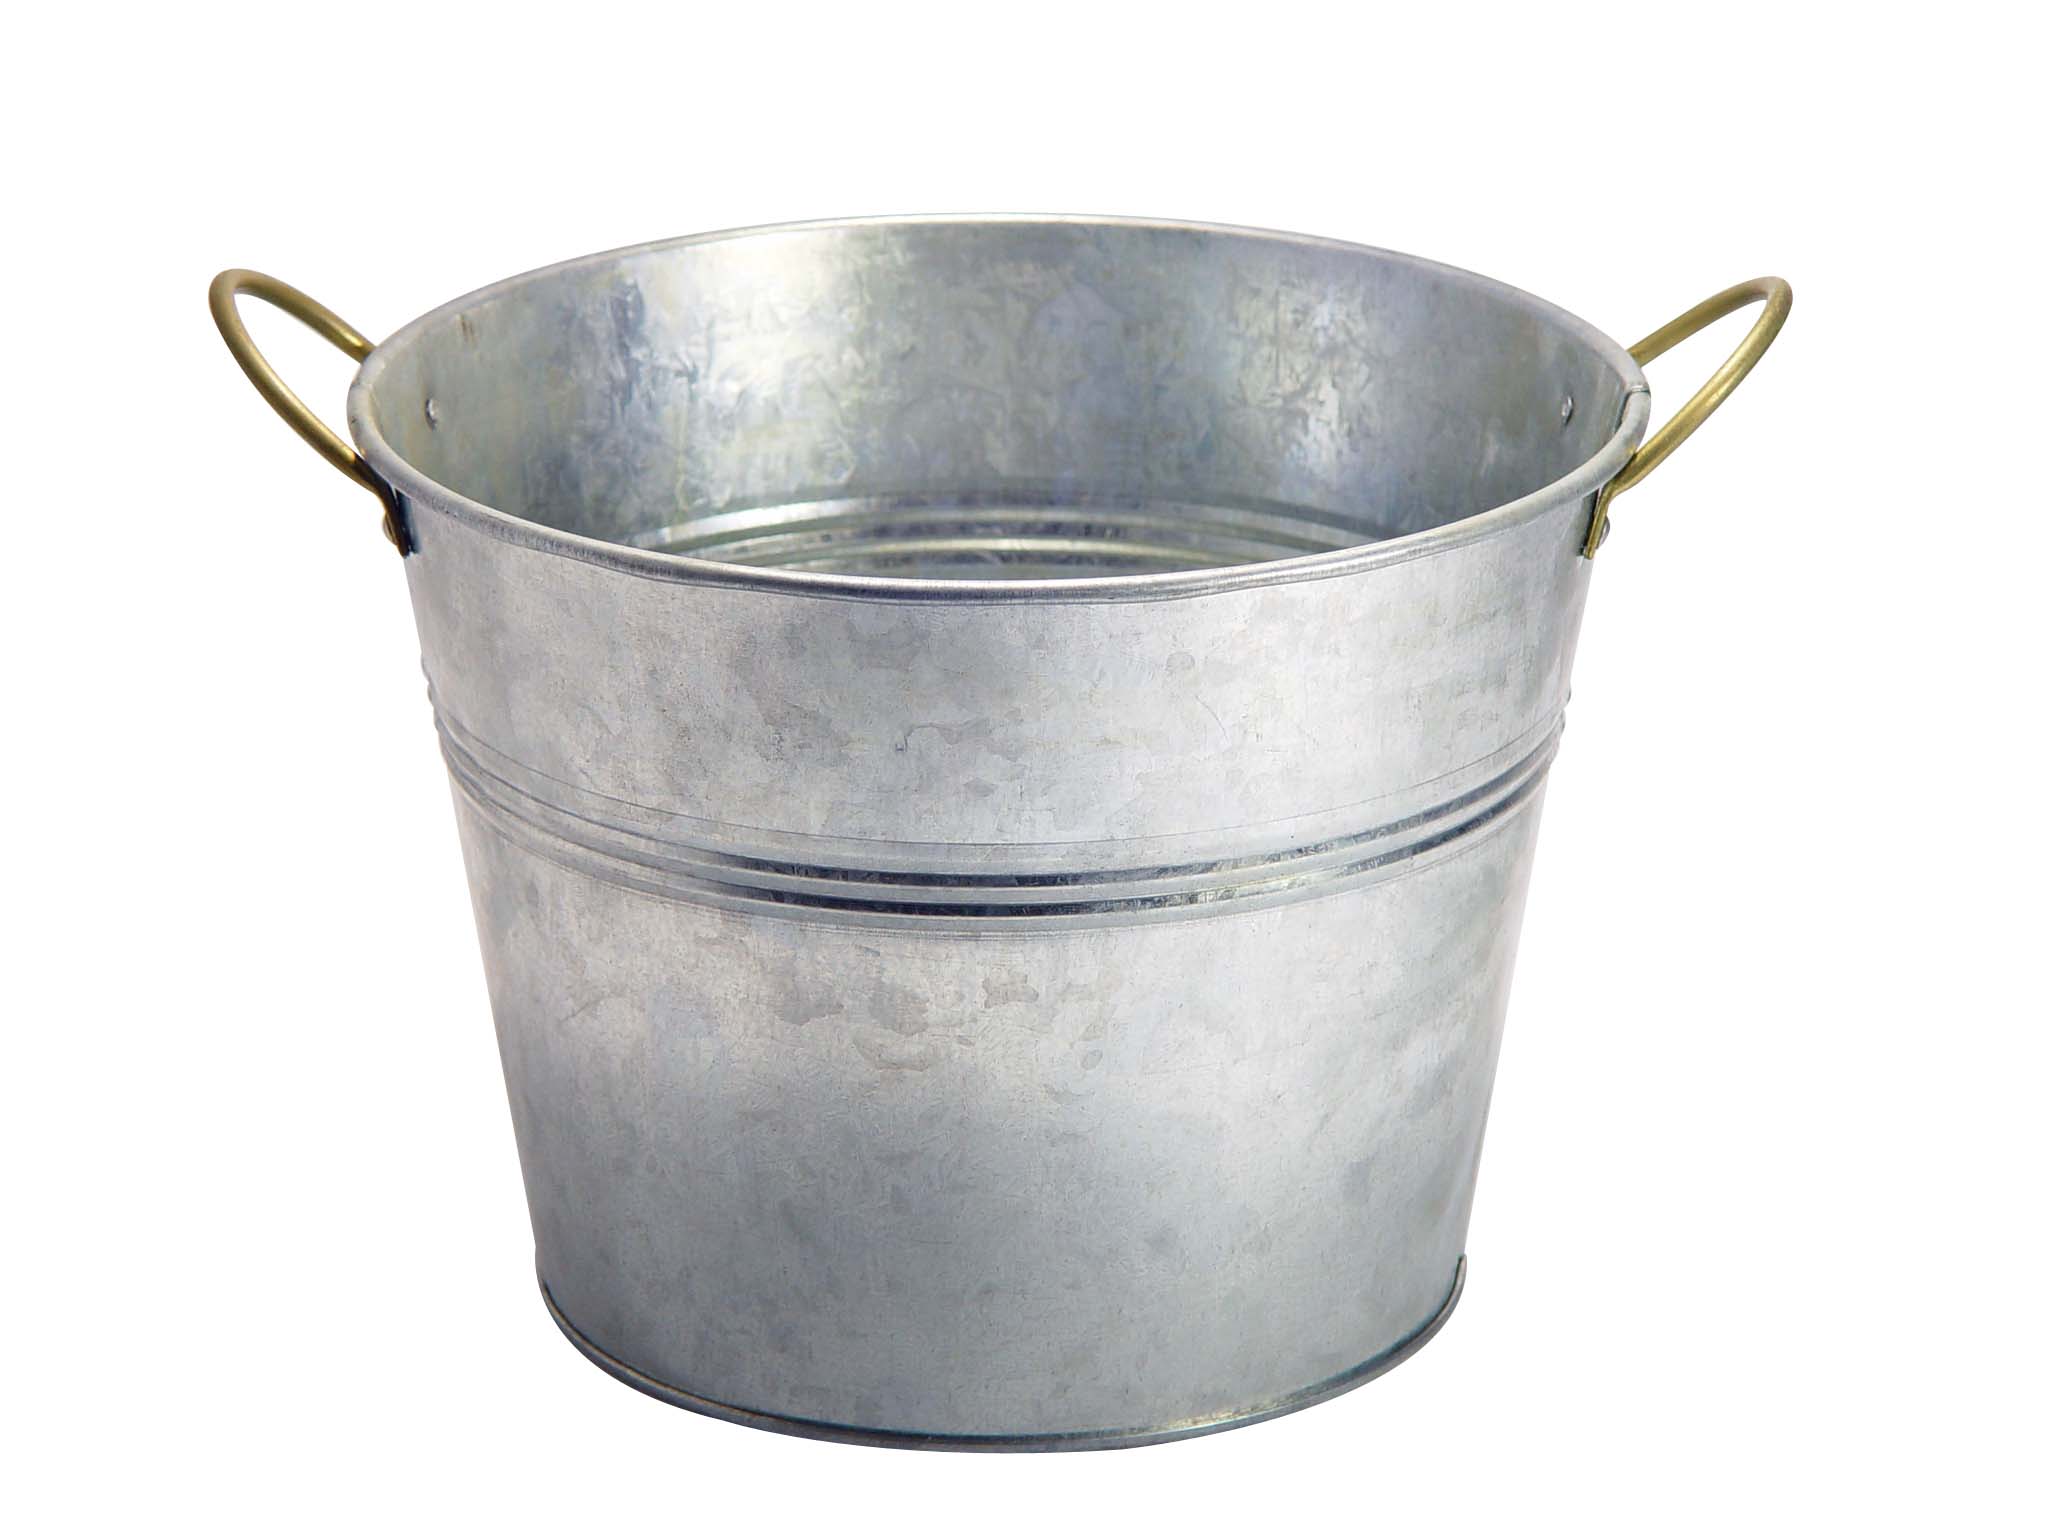  our bucket is full, we feel great. When it’s empty, we feel awful